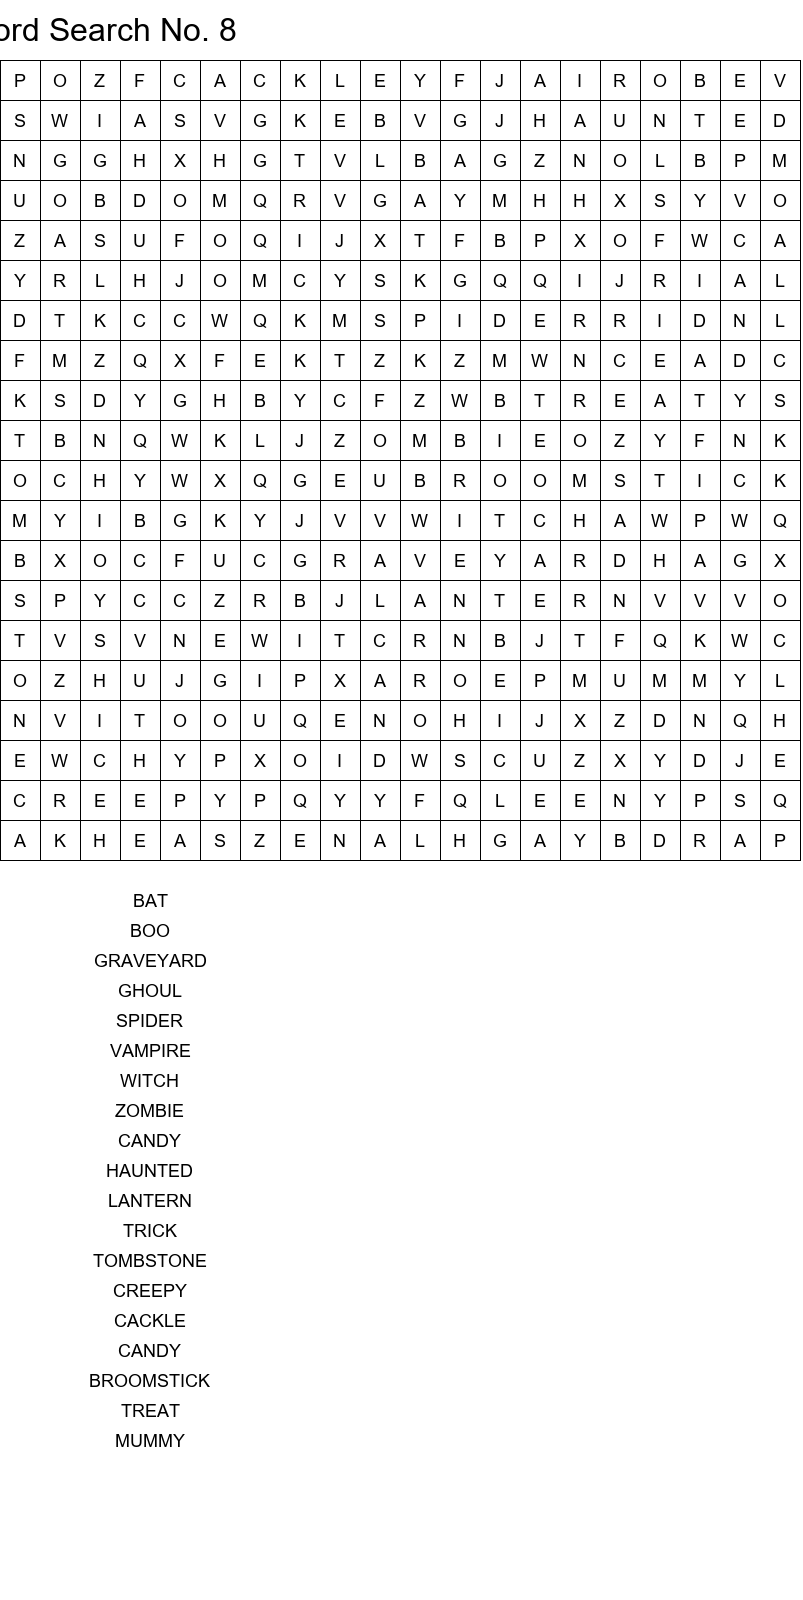 Top 20x20 Halloween word search with answers size 20x20 No 8